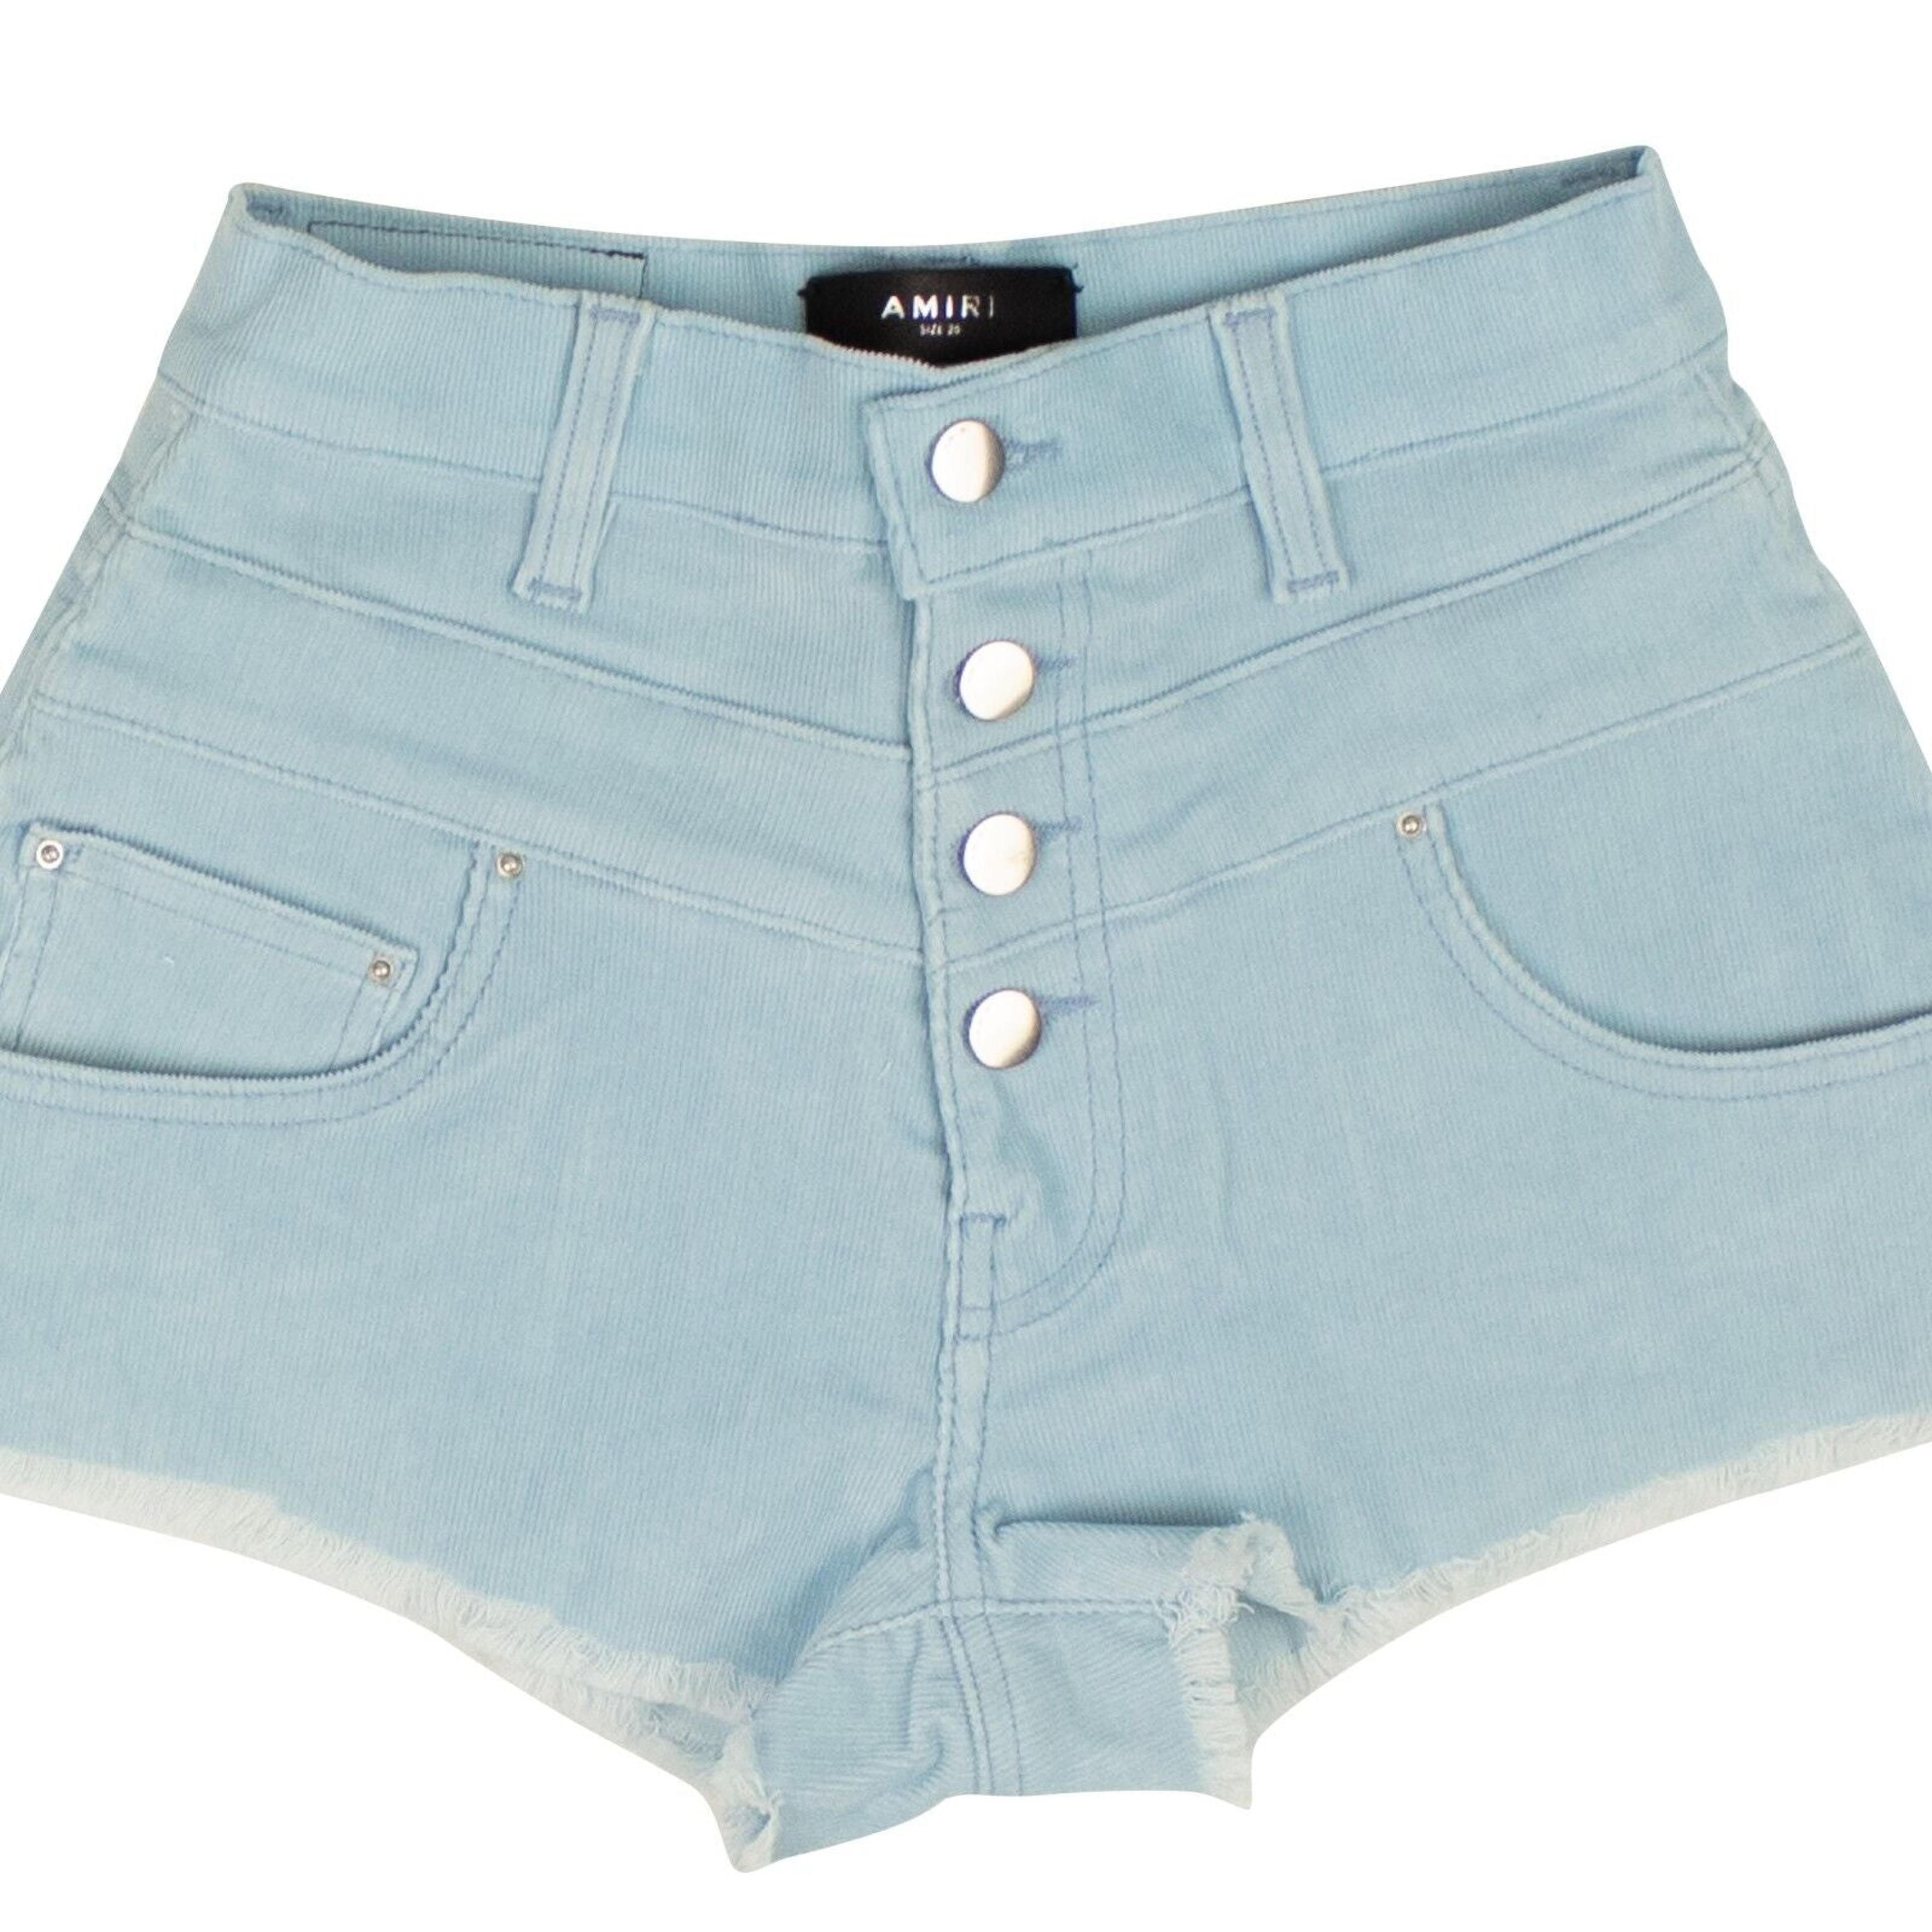 Alternate View 2 of Blue Corduroy High Waisted Shorts